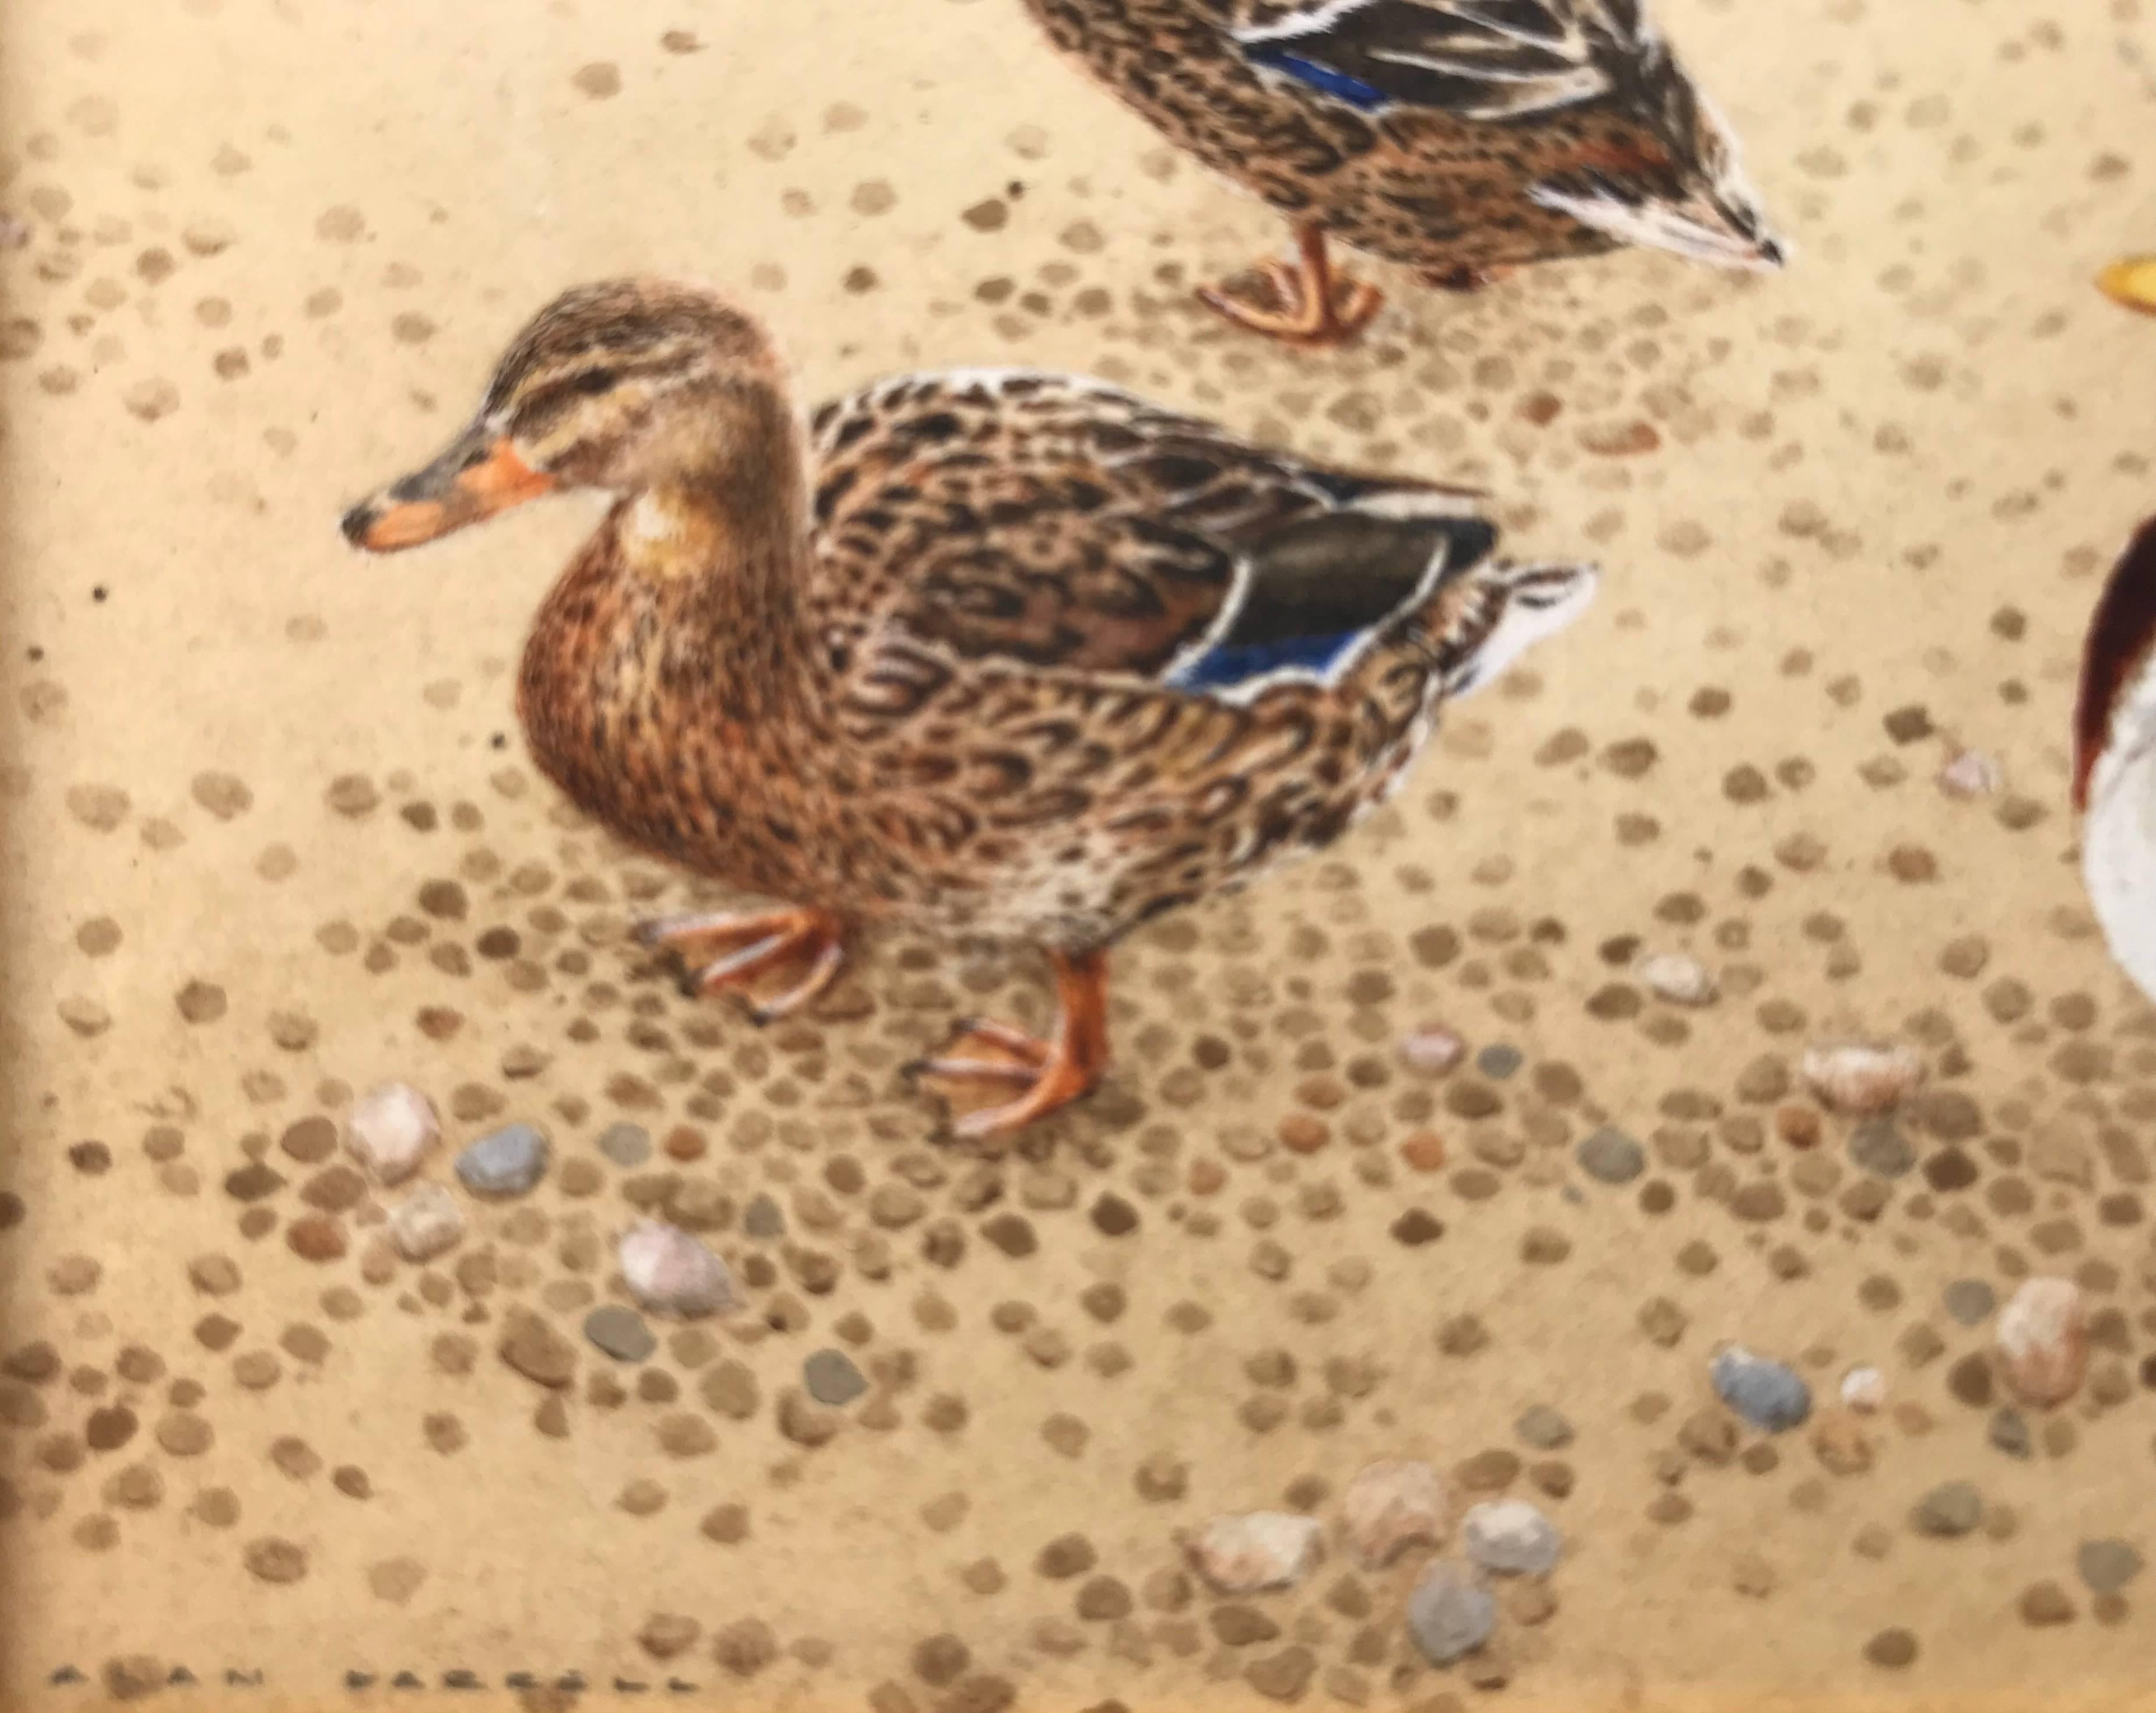 Miniature watercolor painting on arches paper of three mallards at Salthouse (Norfolk, UK) done by the very well known miniature artist, Alan Farrell. Exhibited at the Royal Miniature Society exhibition in 2000. Exhibition label verso. Signed lower